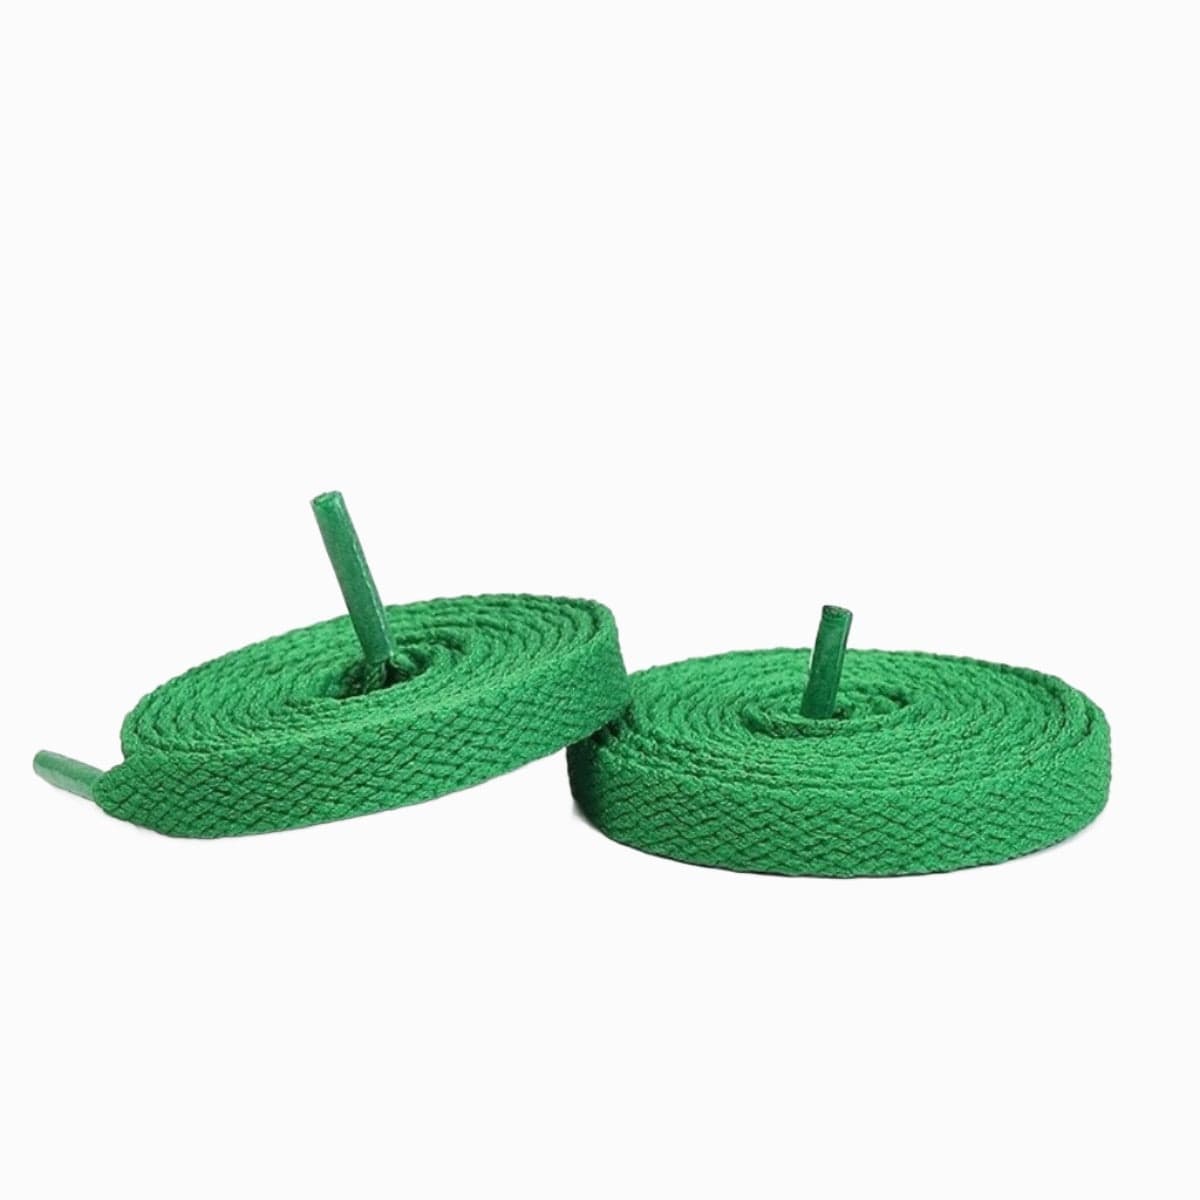 Green Replacement Shoe Laces for Adidas Handball Spezial Sneakers by Kicks Shoelaces